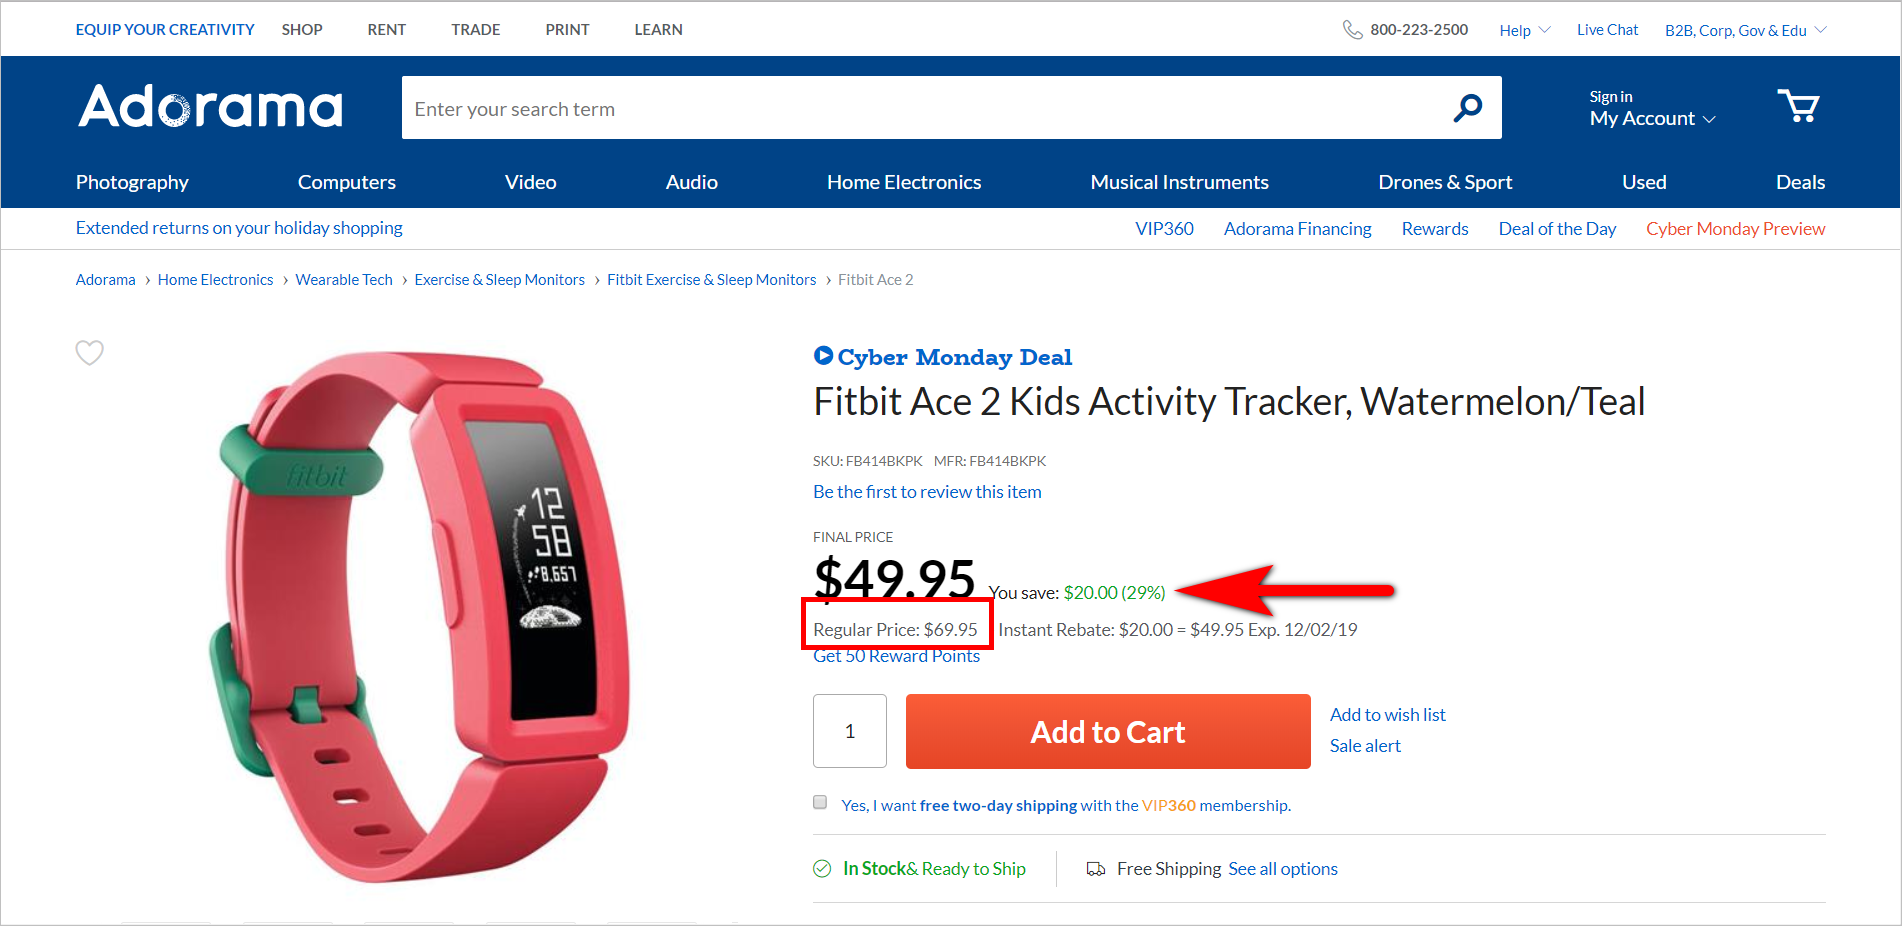 the rule of 100 example - adorama.com product detail page for fitbit ace 2 with a regular price of $69.95 and a sale price of $49.95. the pdp shows that the customer saves $20.00 or 29%